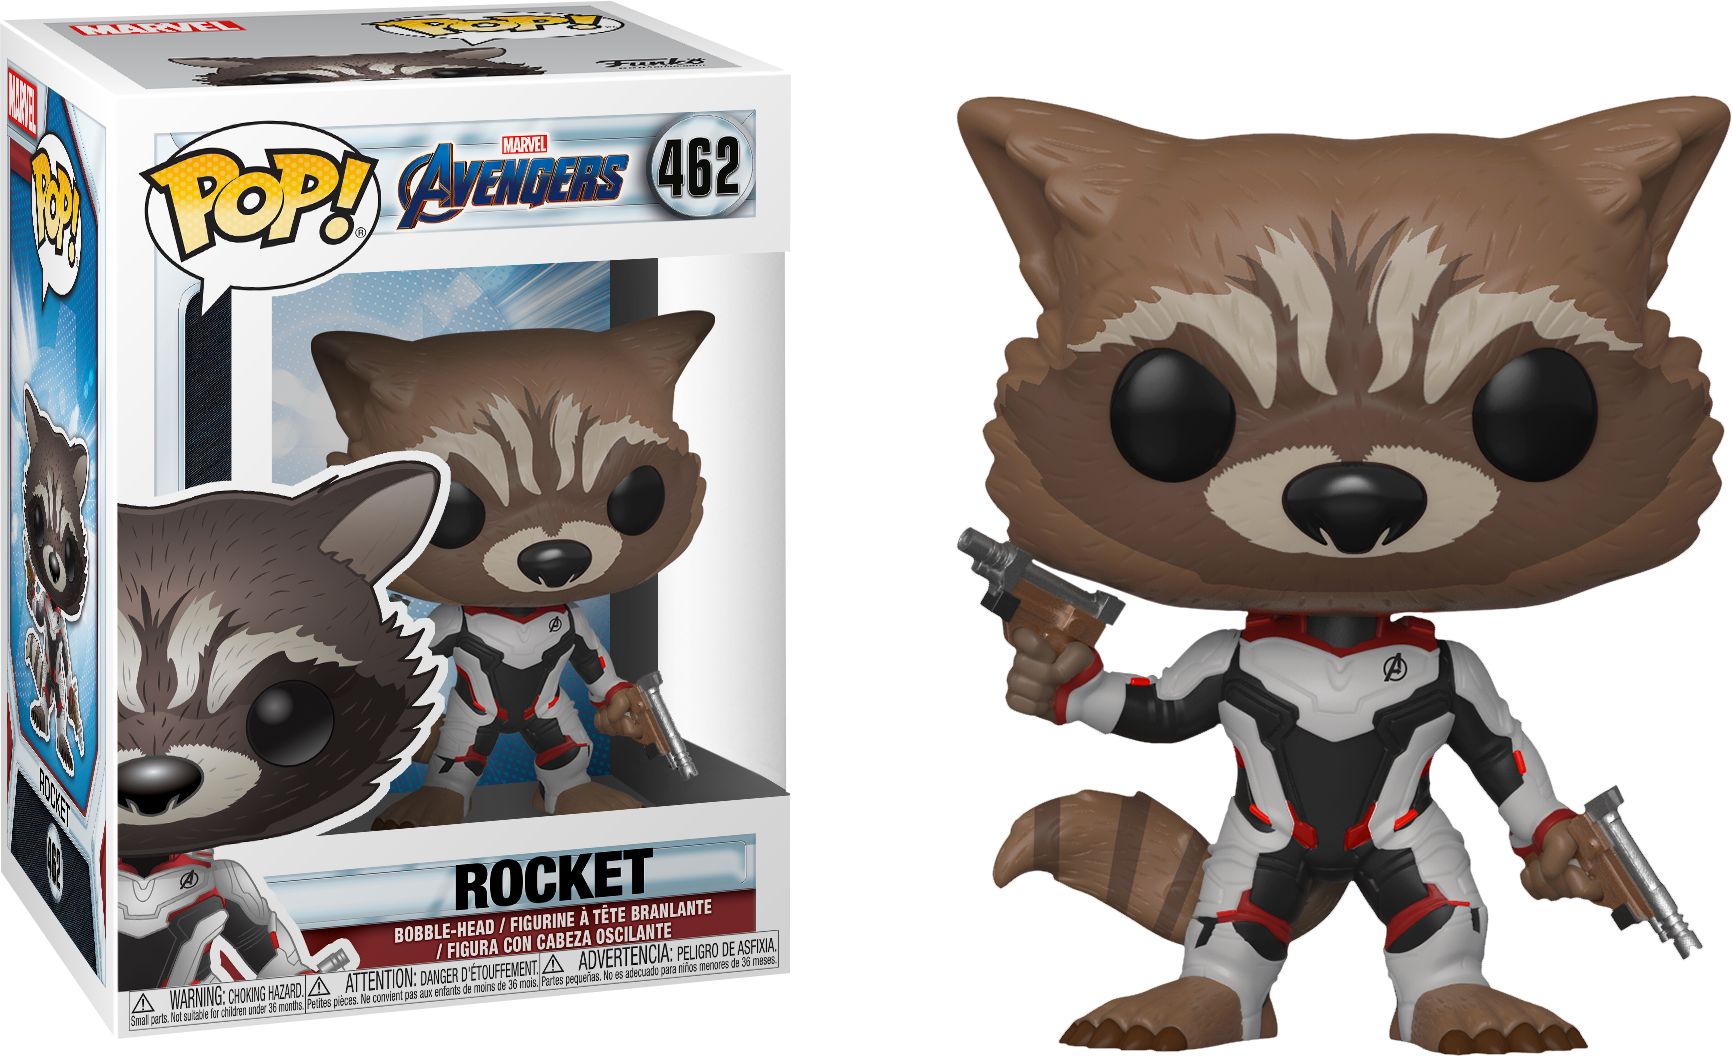 A Toy Figurine Of A Raccoon